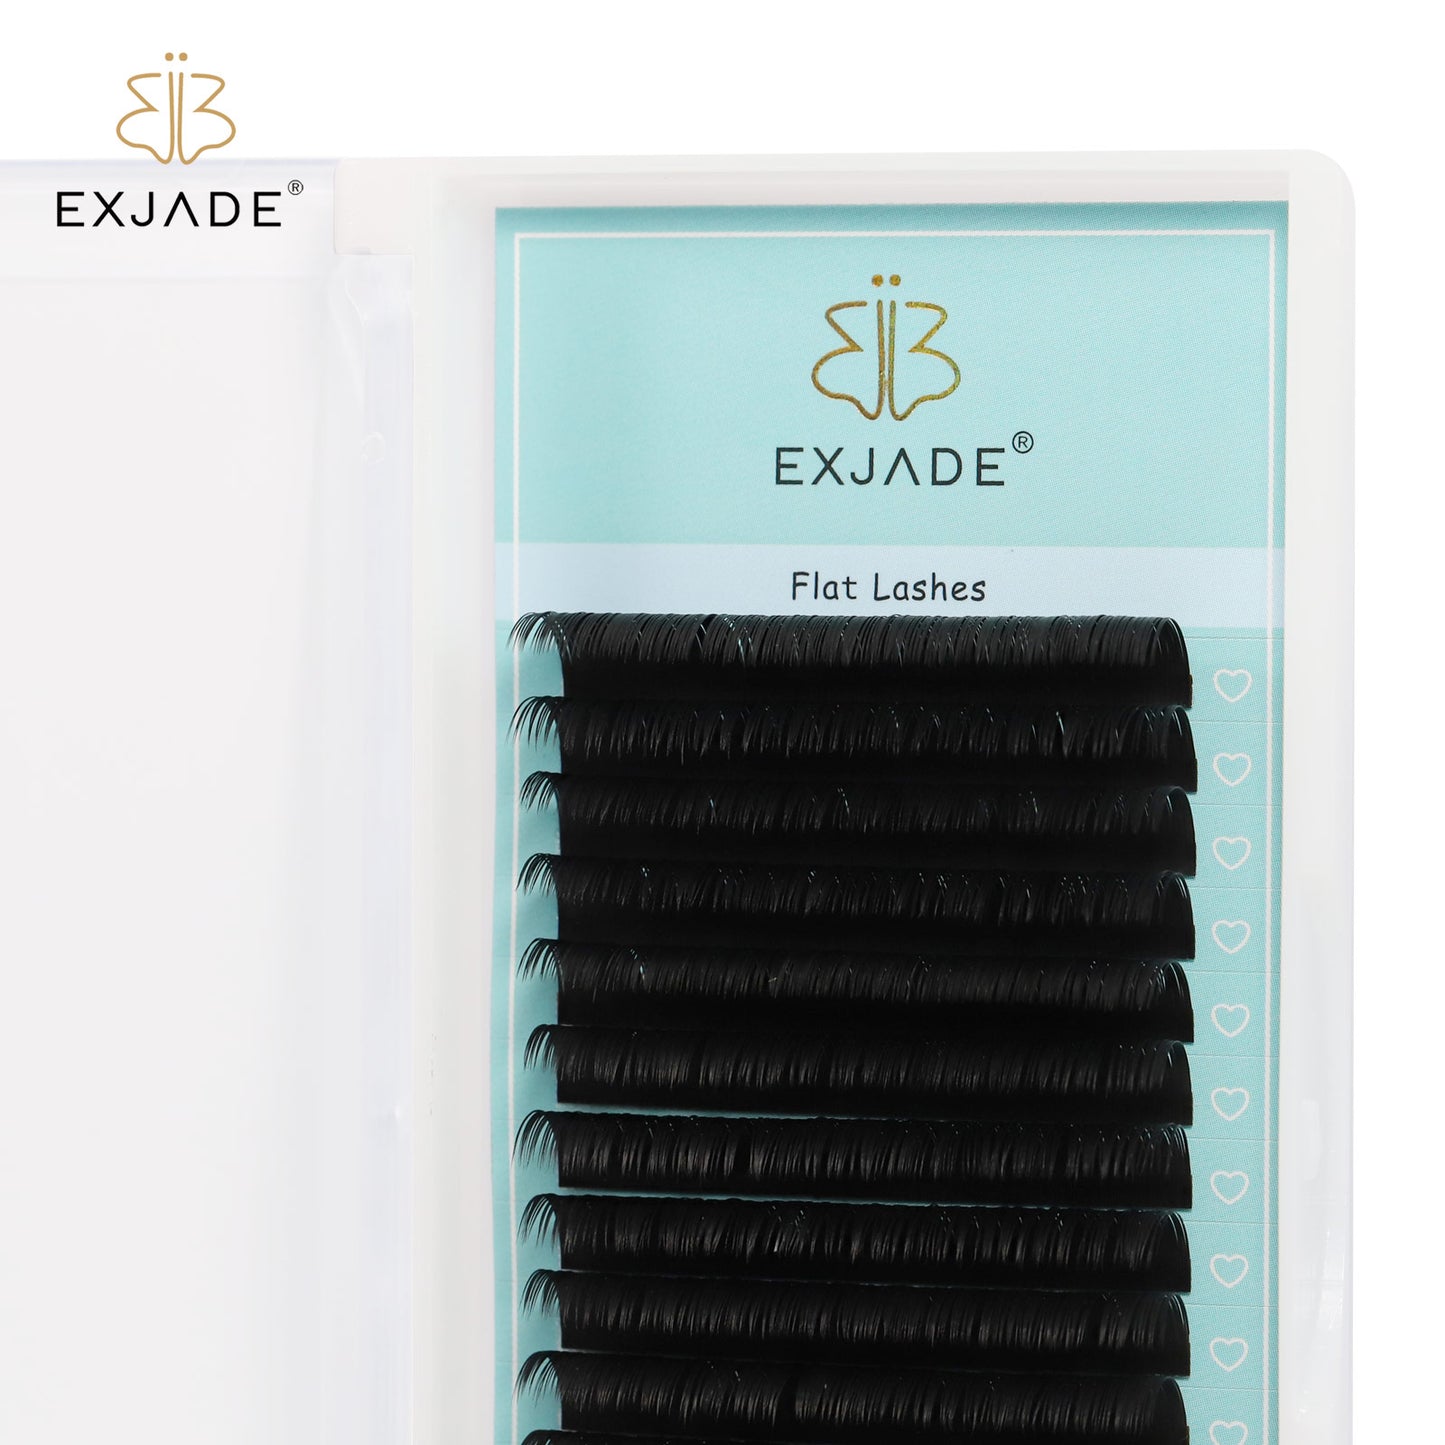 0.15mm Ellipse flat lashes (16 rows)